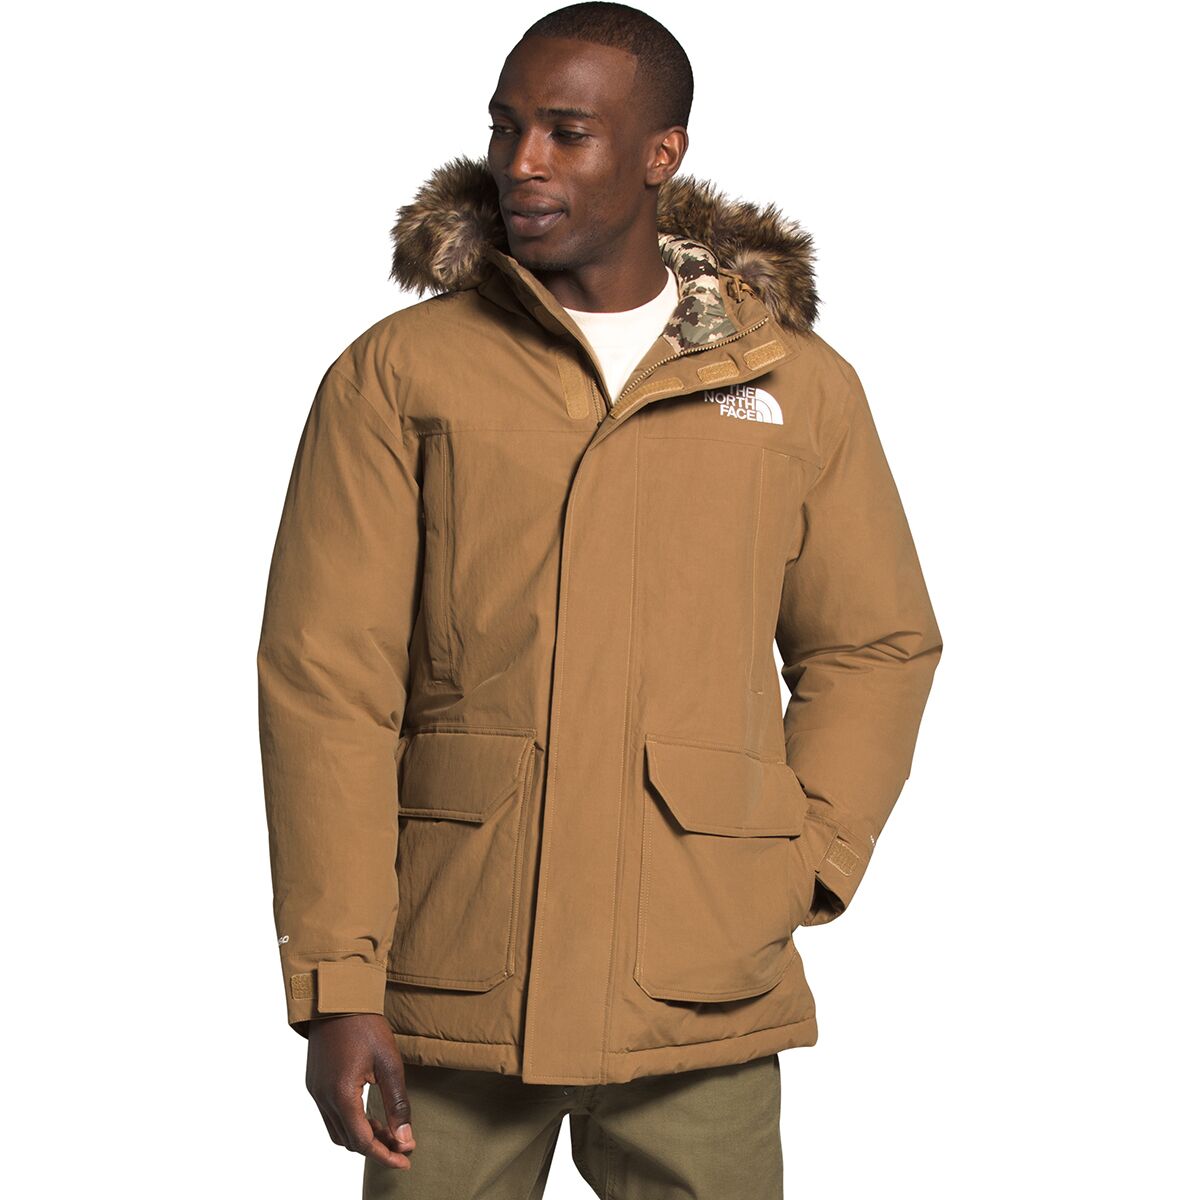 north face replacement hood